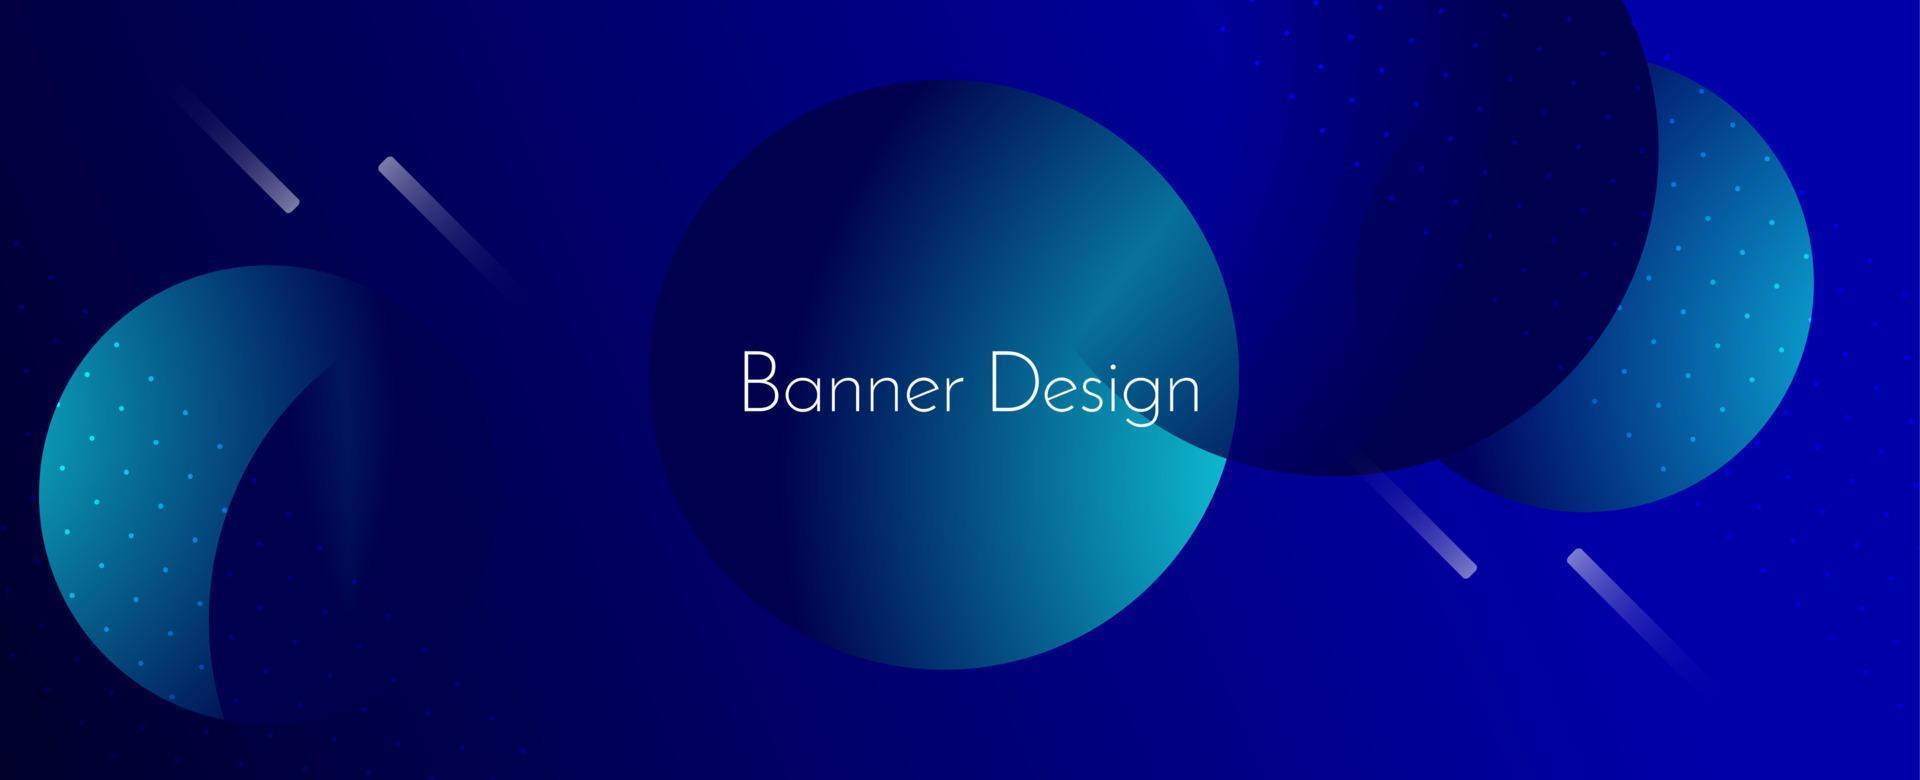 Abstract geometric modern stylish colorful modern pattern banner background vector